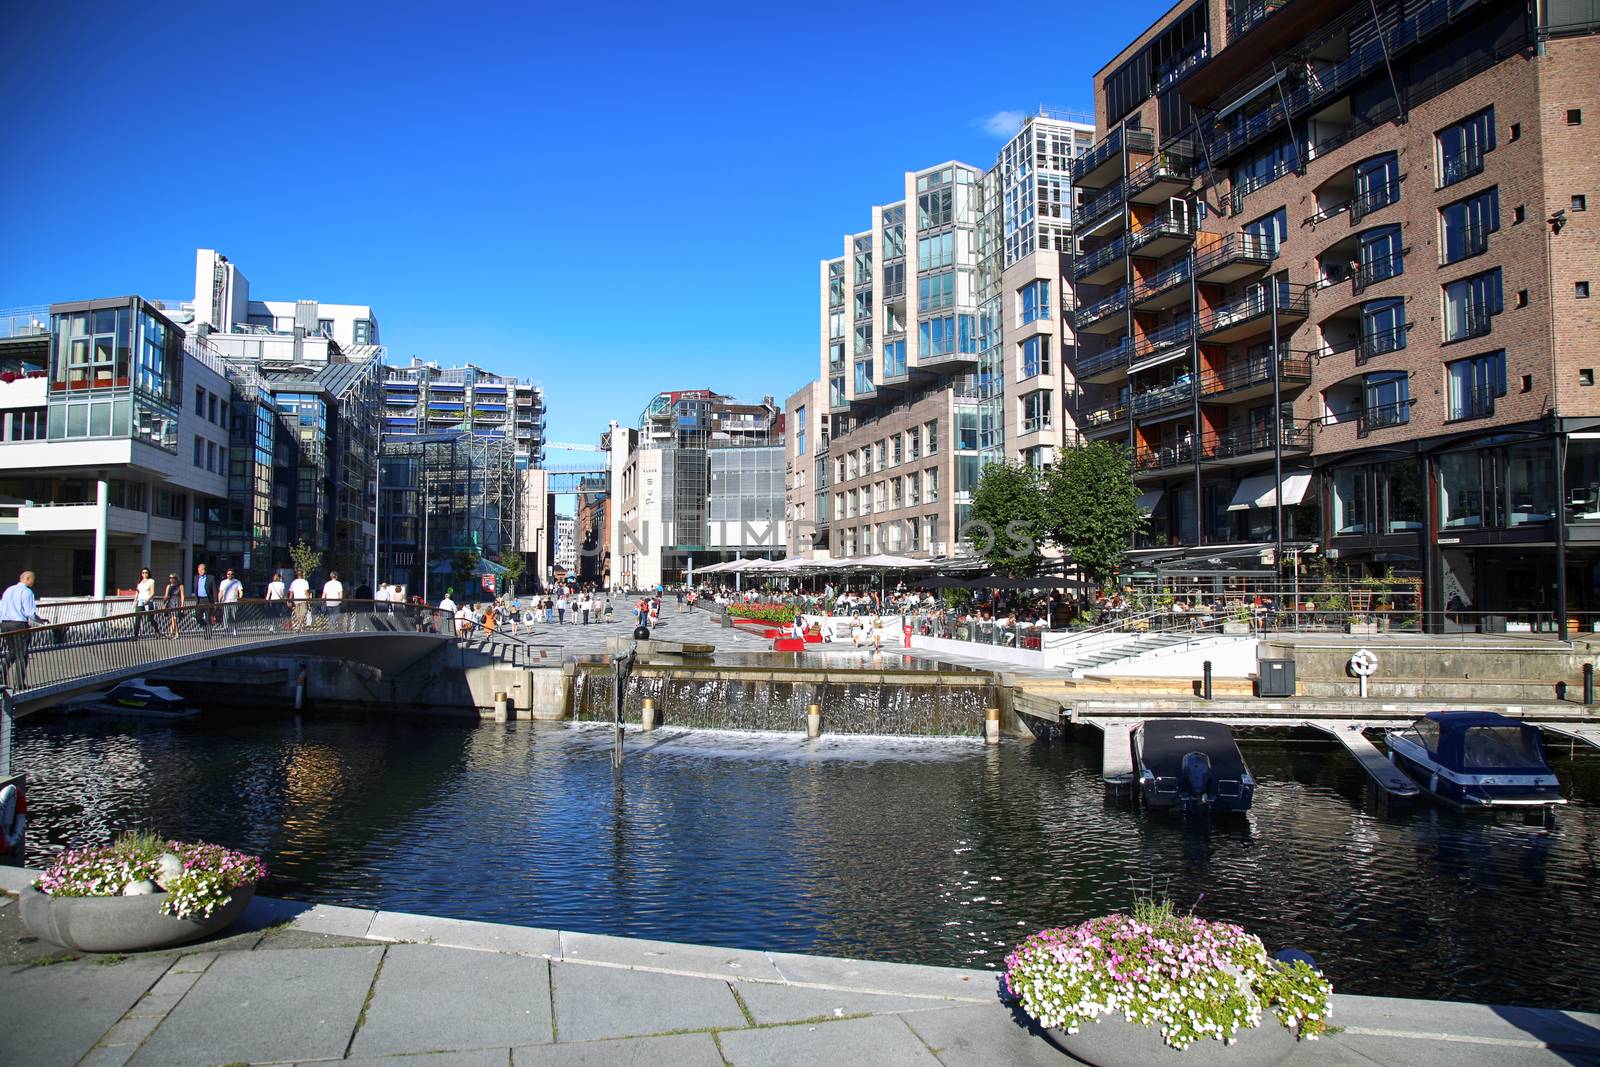 OSLO, NORWAY – AUGUST 17, 2016: People walking on wonderful modern residential district Aker Brygge with lux apartments, shopping, culture and restaurants in Oslo, Norway on August 17,2016.